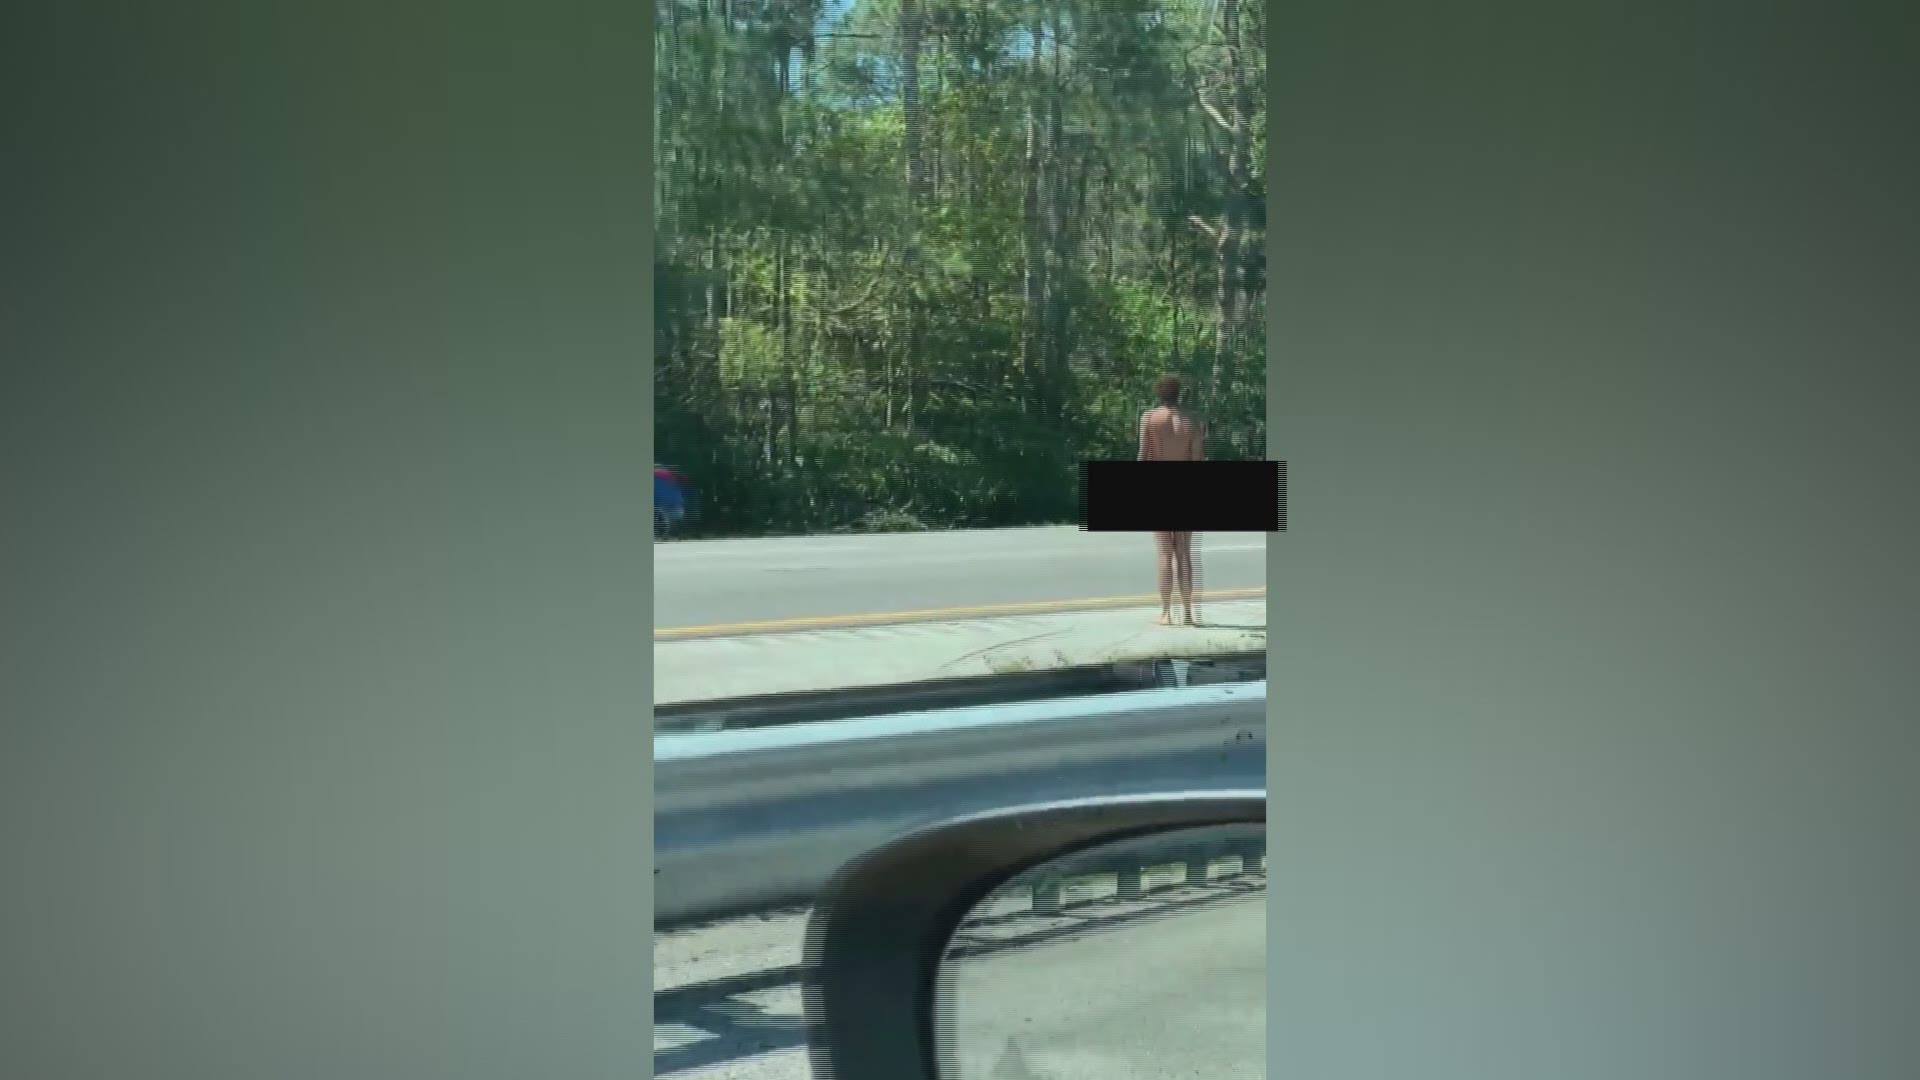 Richard Griffin wasn't expecting to see something like this when he and his wife Donna were driving on Interstate 95 the other day. (Video: Richard Griffin)